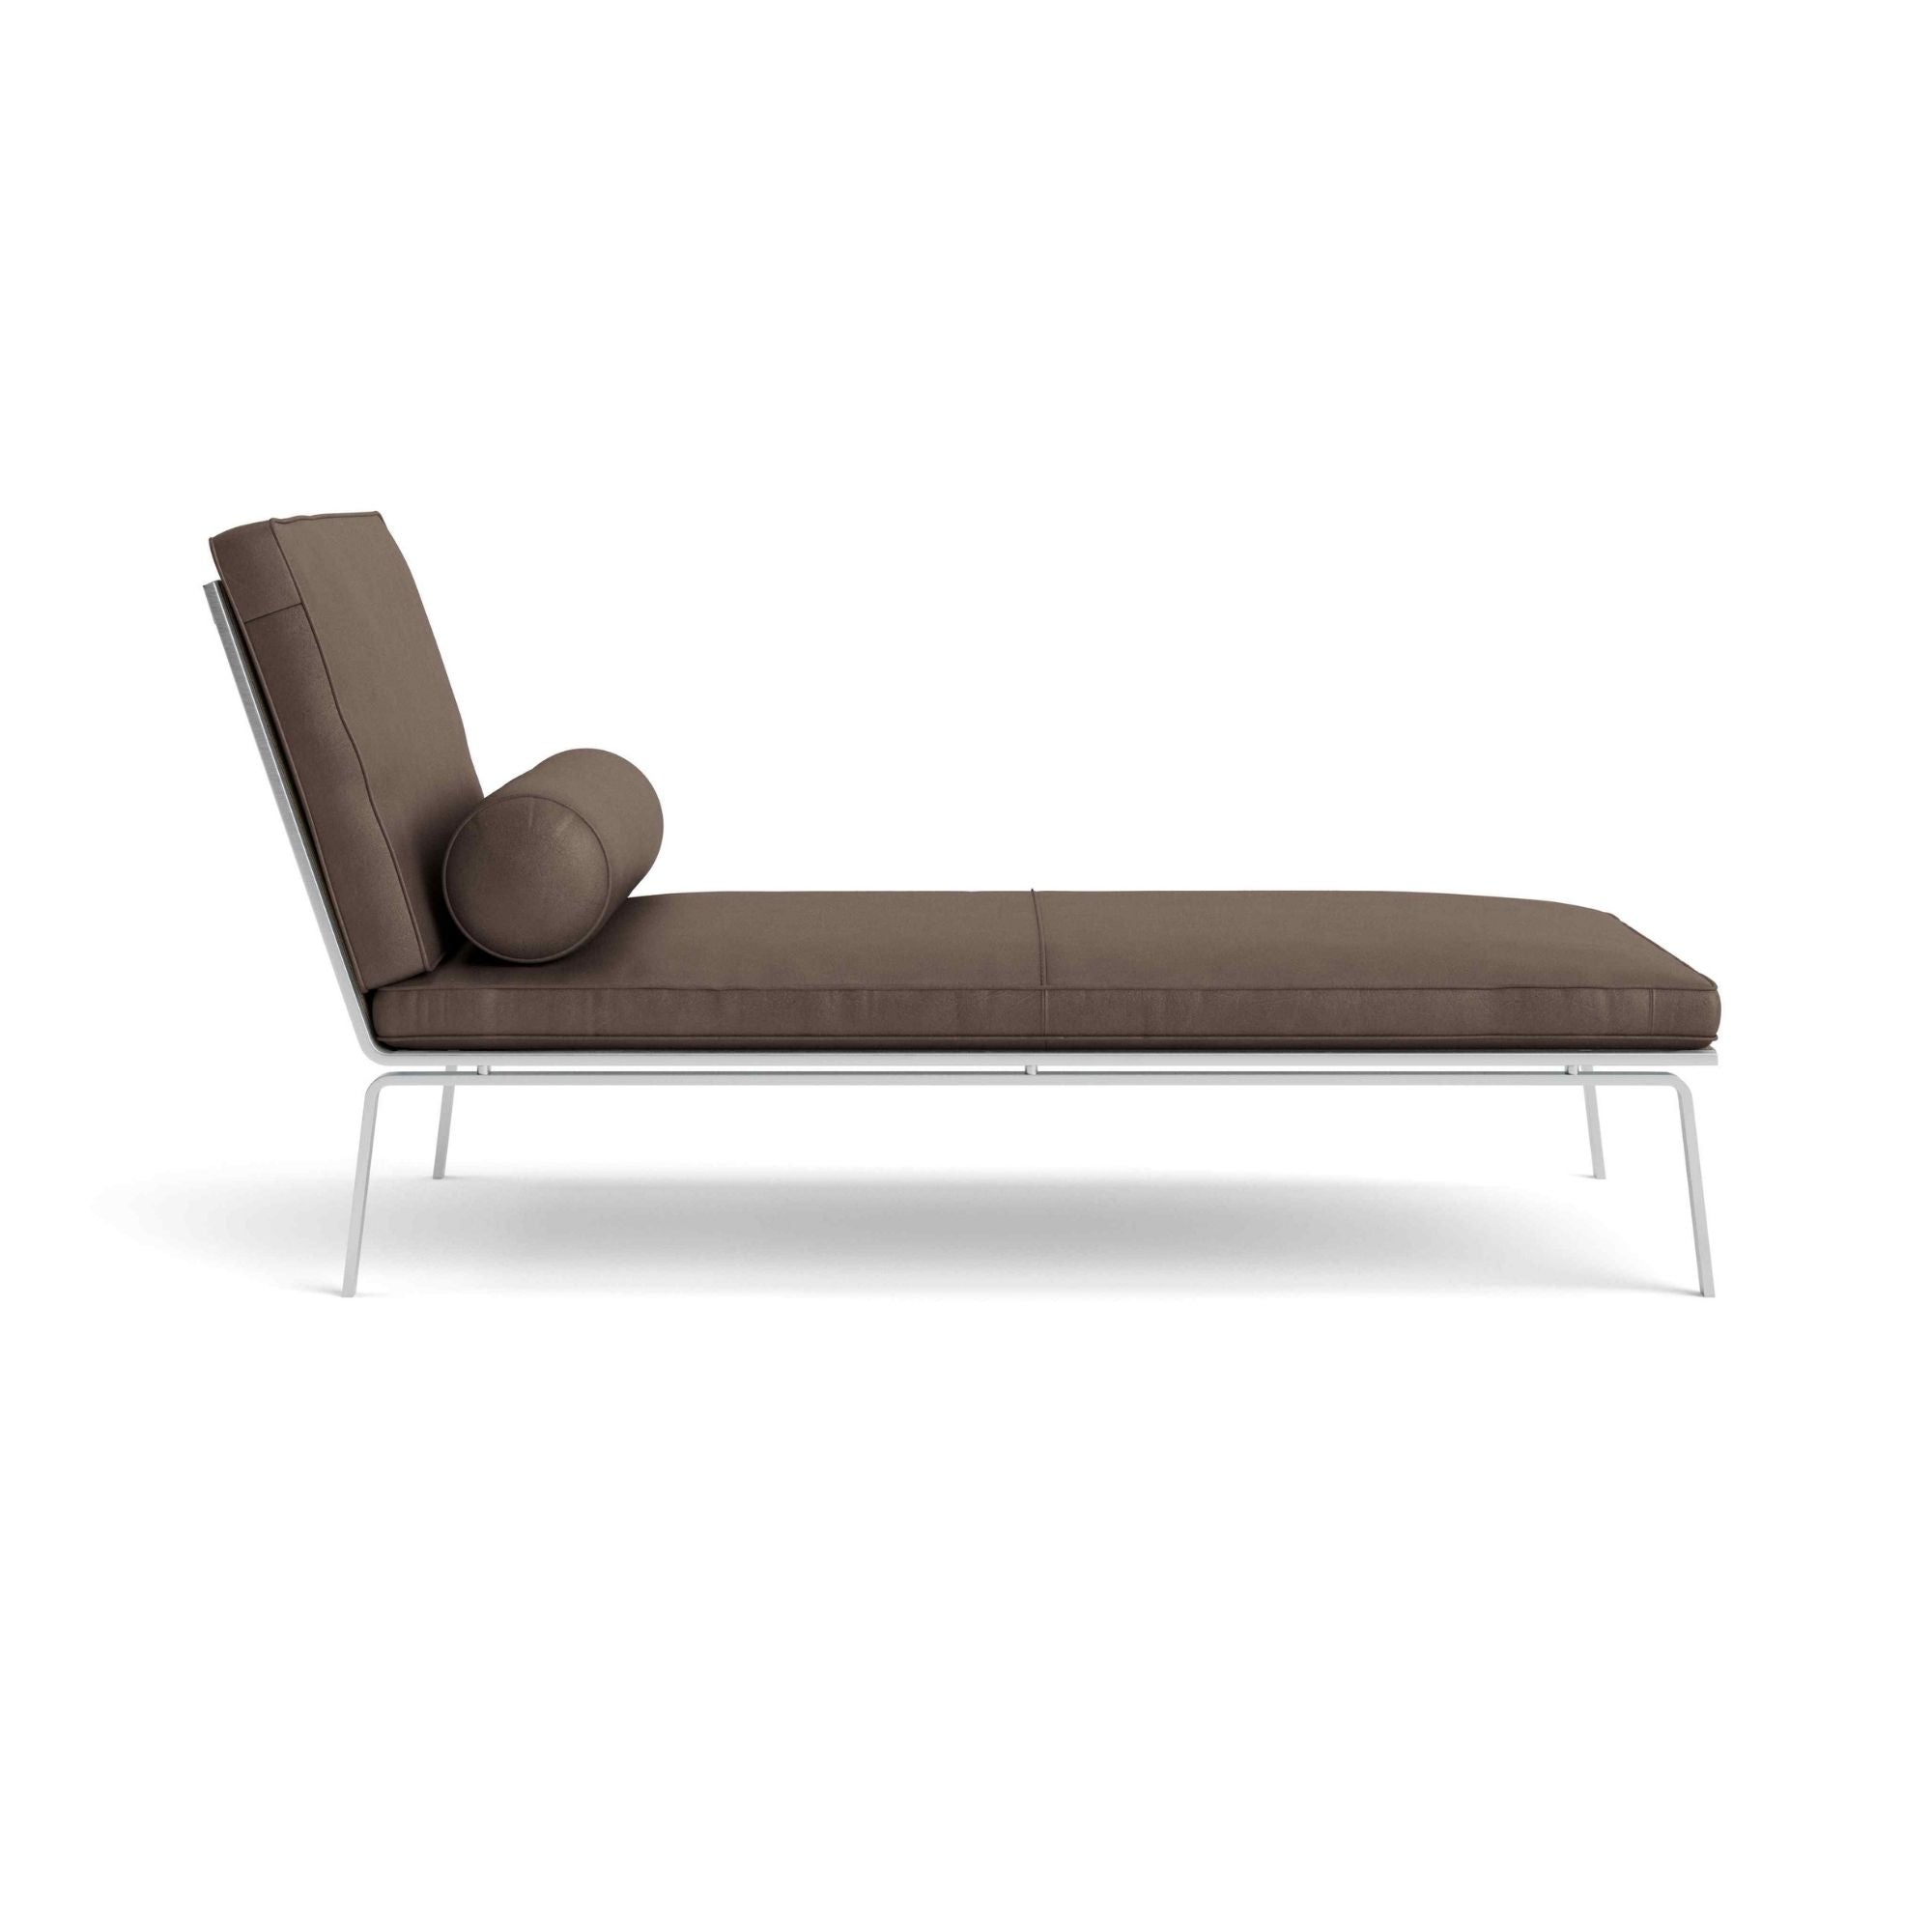 Man Chaise Lounge - Leather - THAT COOL LIVING